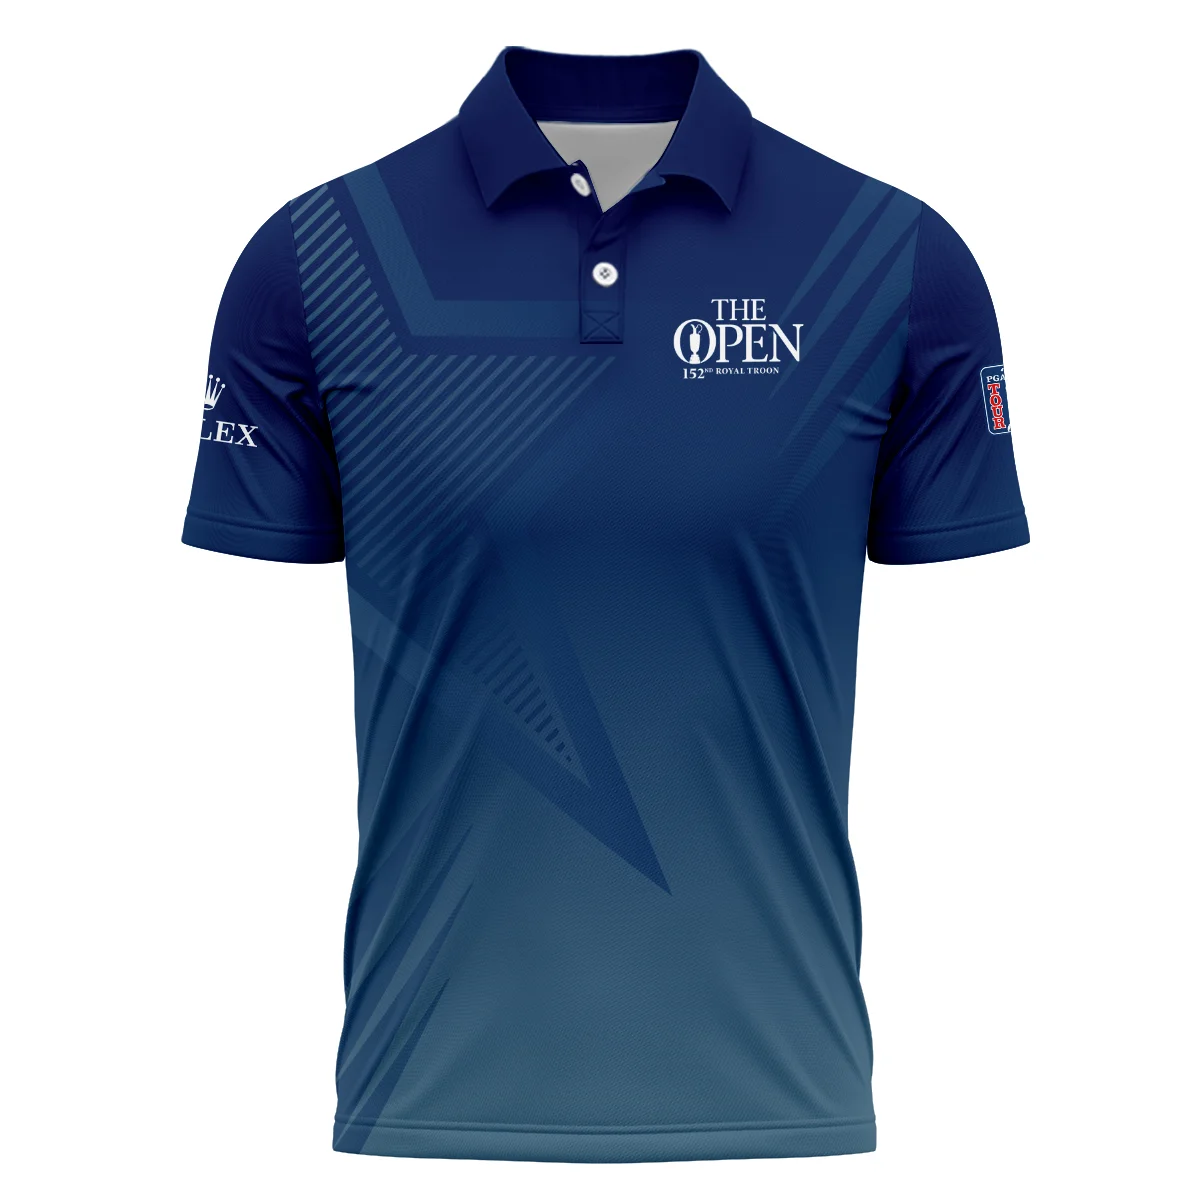 Rolex 152nd Open Championship Abstract Background Dark Blue Gradient Star Line Hoodie Shirt All Over Prints HOTOP260624A04ROXHD